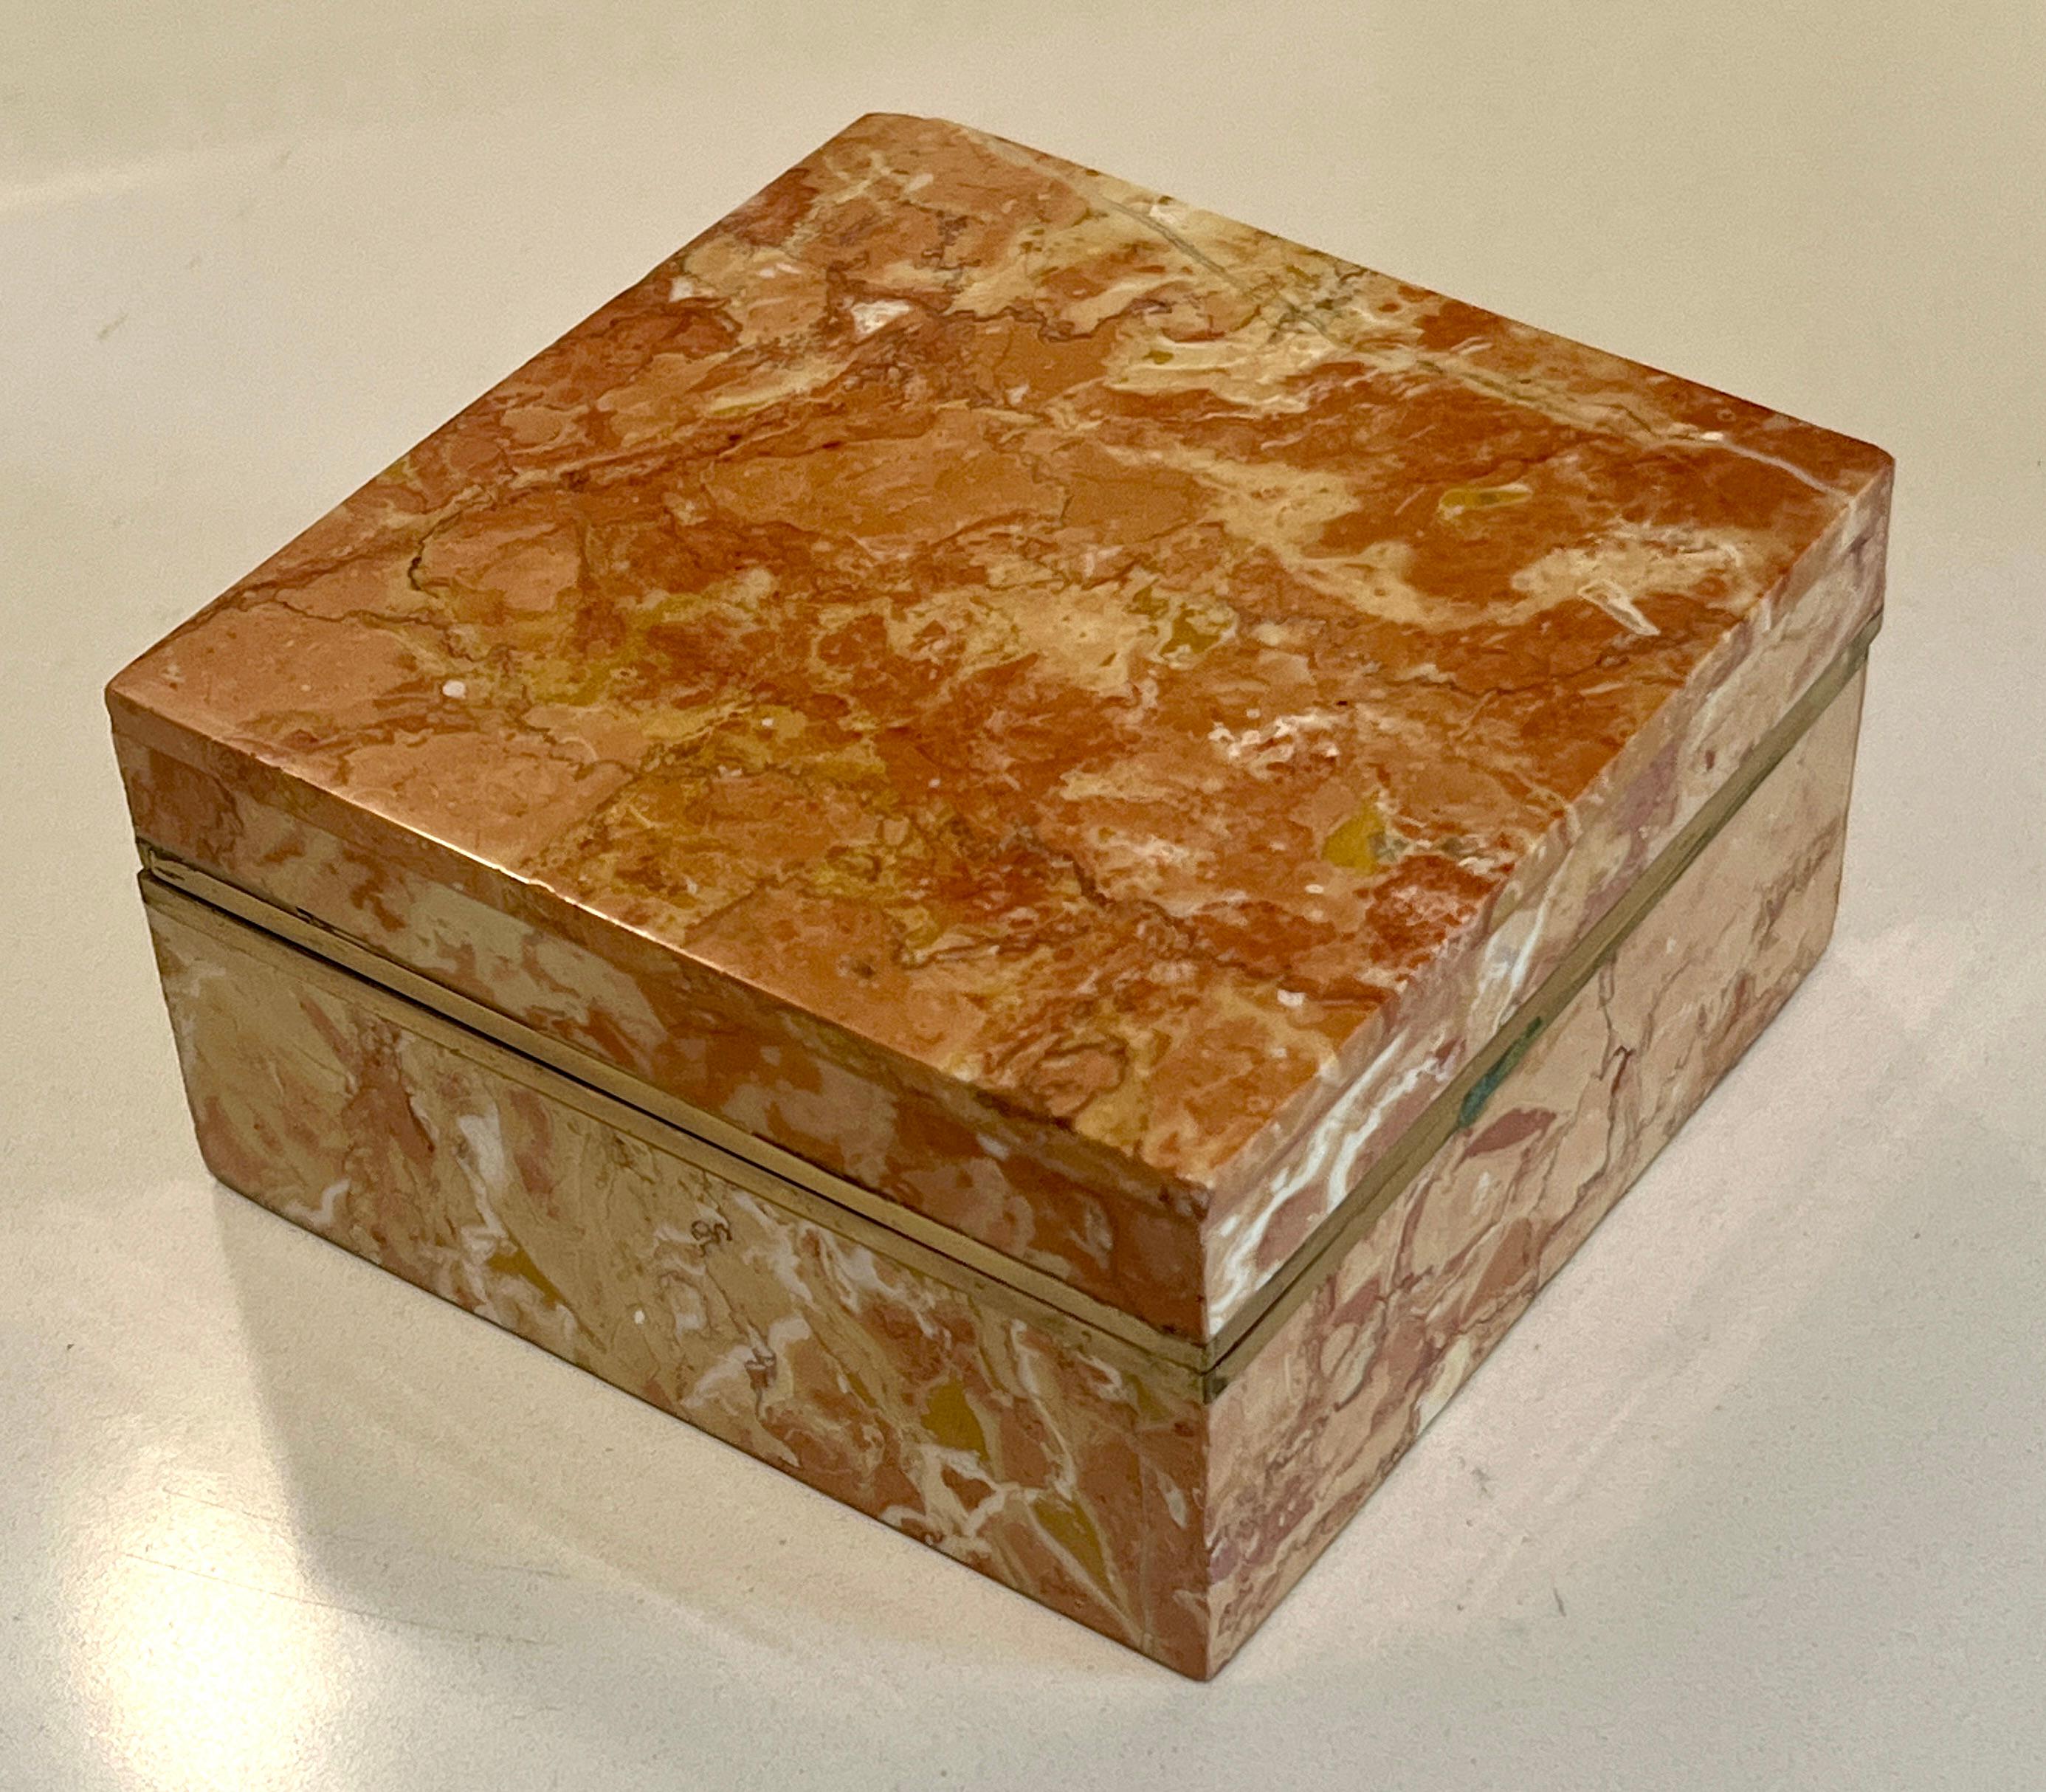 Square Alabaster box with brass banding at closure.  The lid is not hinged but pulls completely off to reveal a brown velvet interior.   The Amber or Gold color alabaster is a wonderful color.

A compliment to any cocktail table, bedside or side